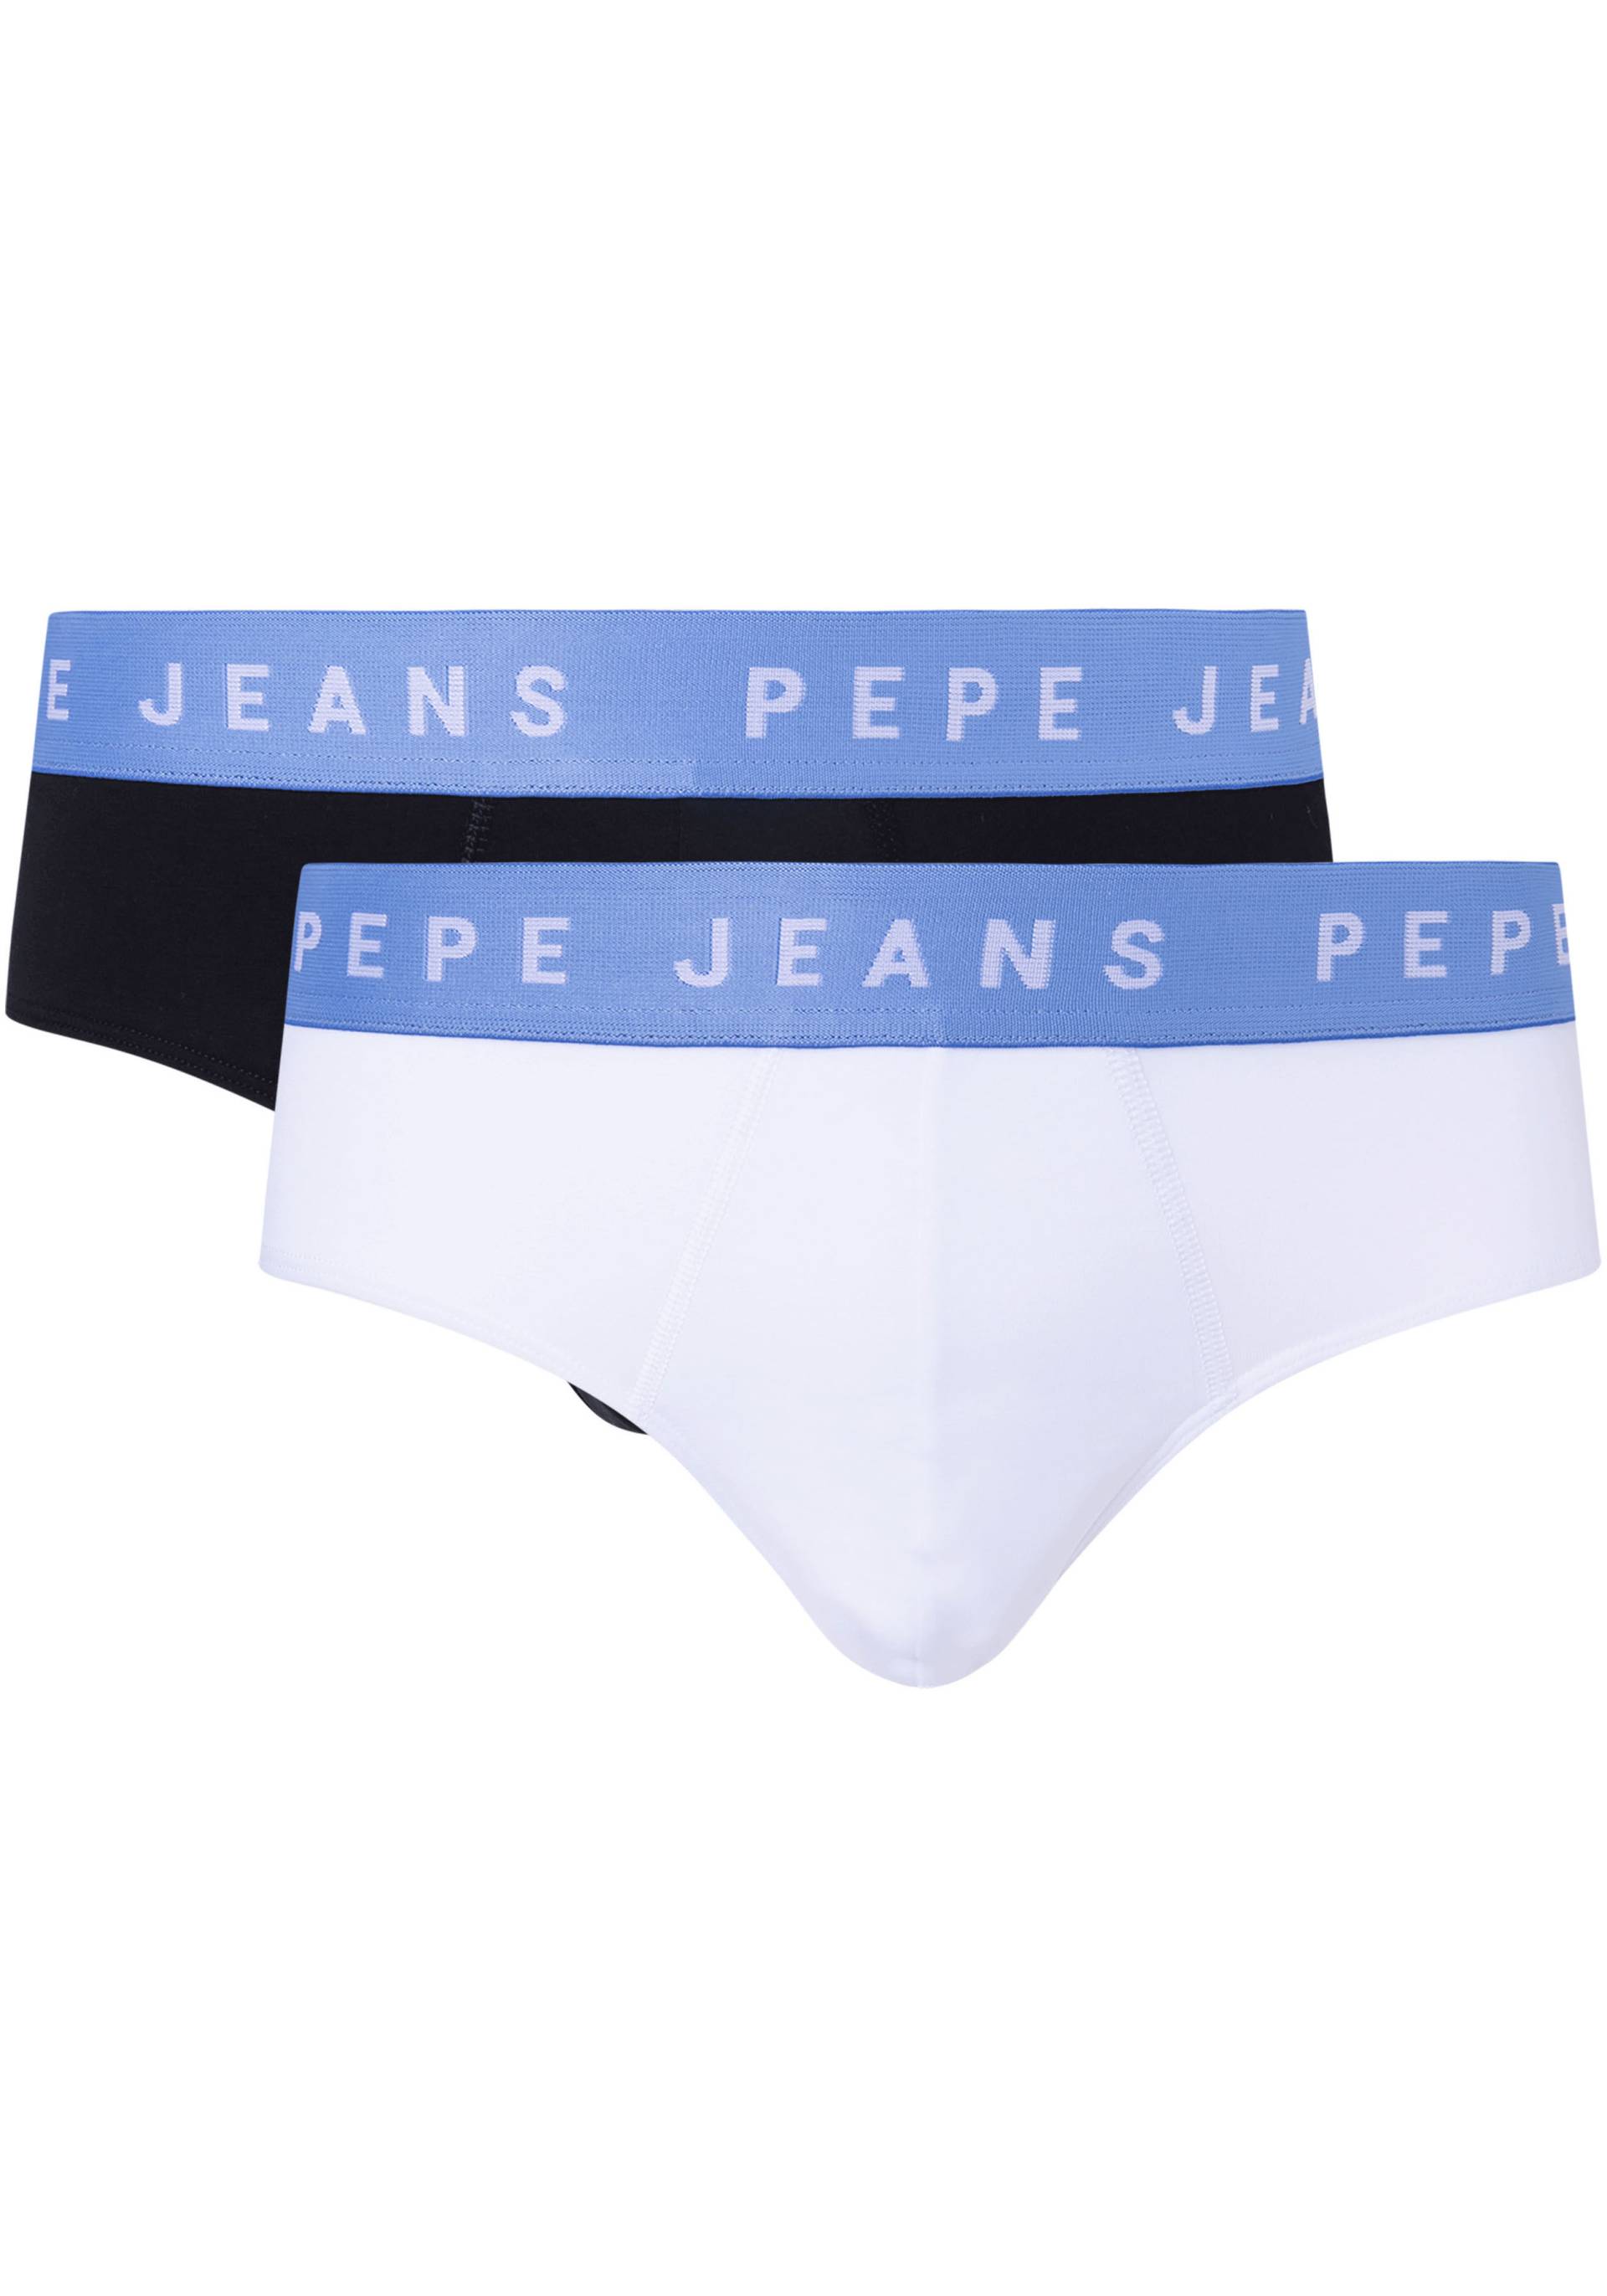 Pepe Jeans Slip, (Packung, 2 St.) von Pepe Jeans